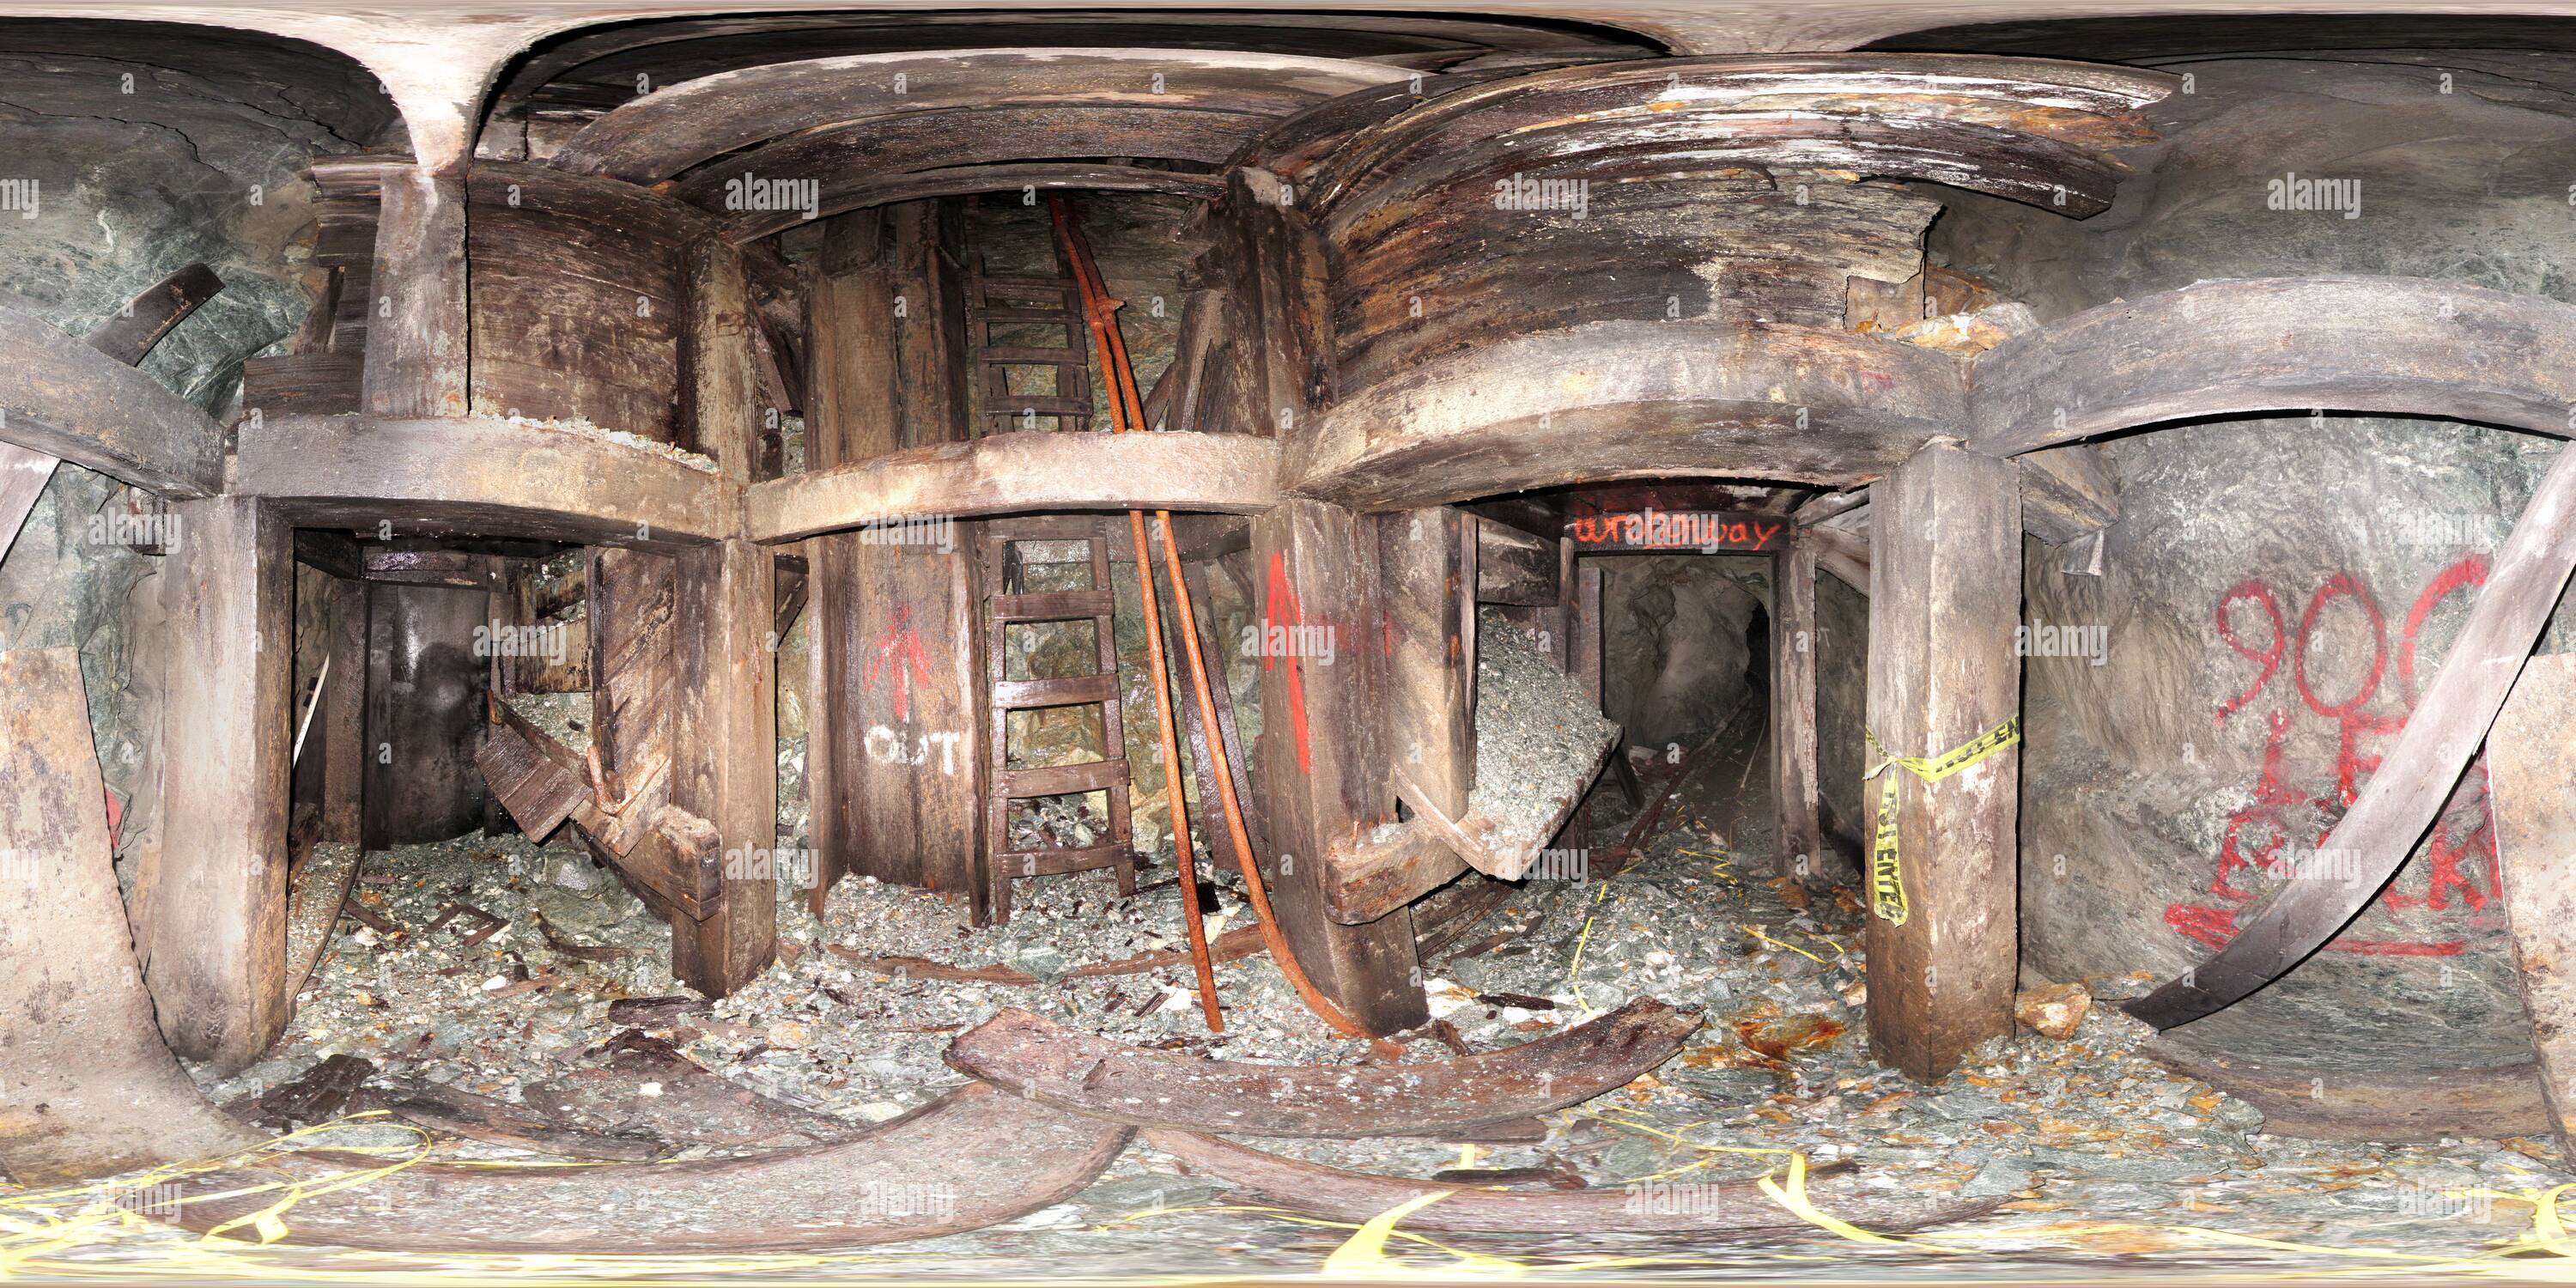 360 degree panoramic view of Houghton Mine - 900 level secondary escape manway & ore chutes